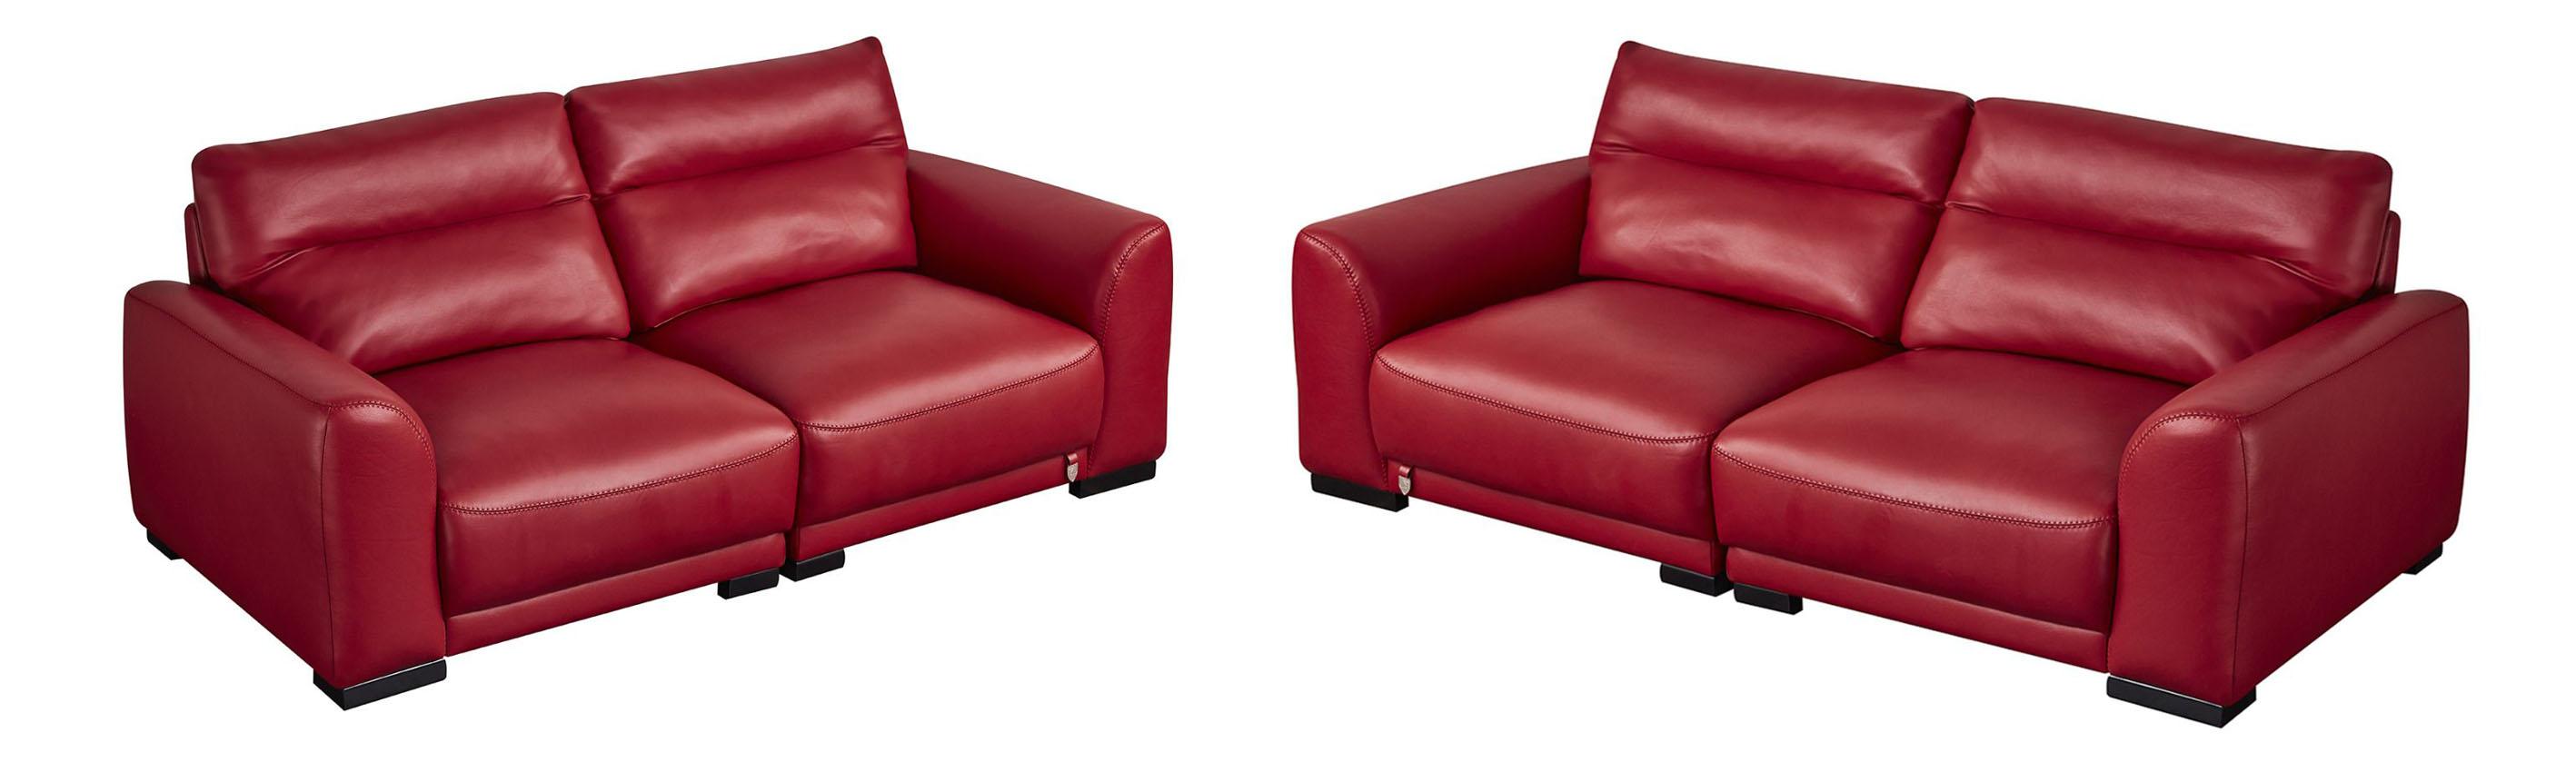 Contemporary Sofa and Loveseat EK8012-RED EK8012-RED-Set-2 in Red Leather